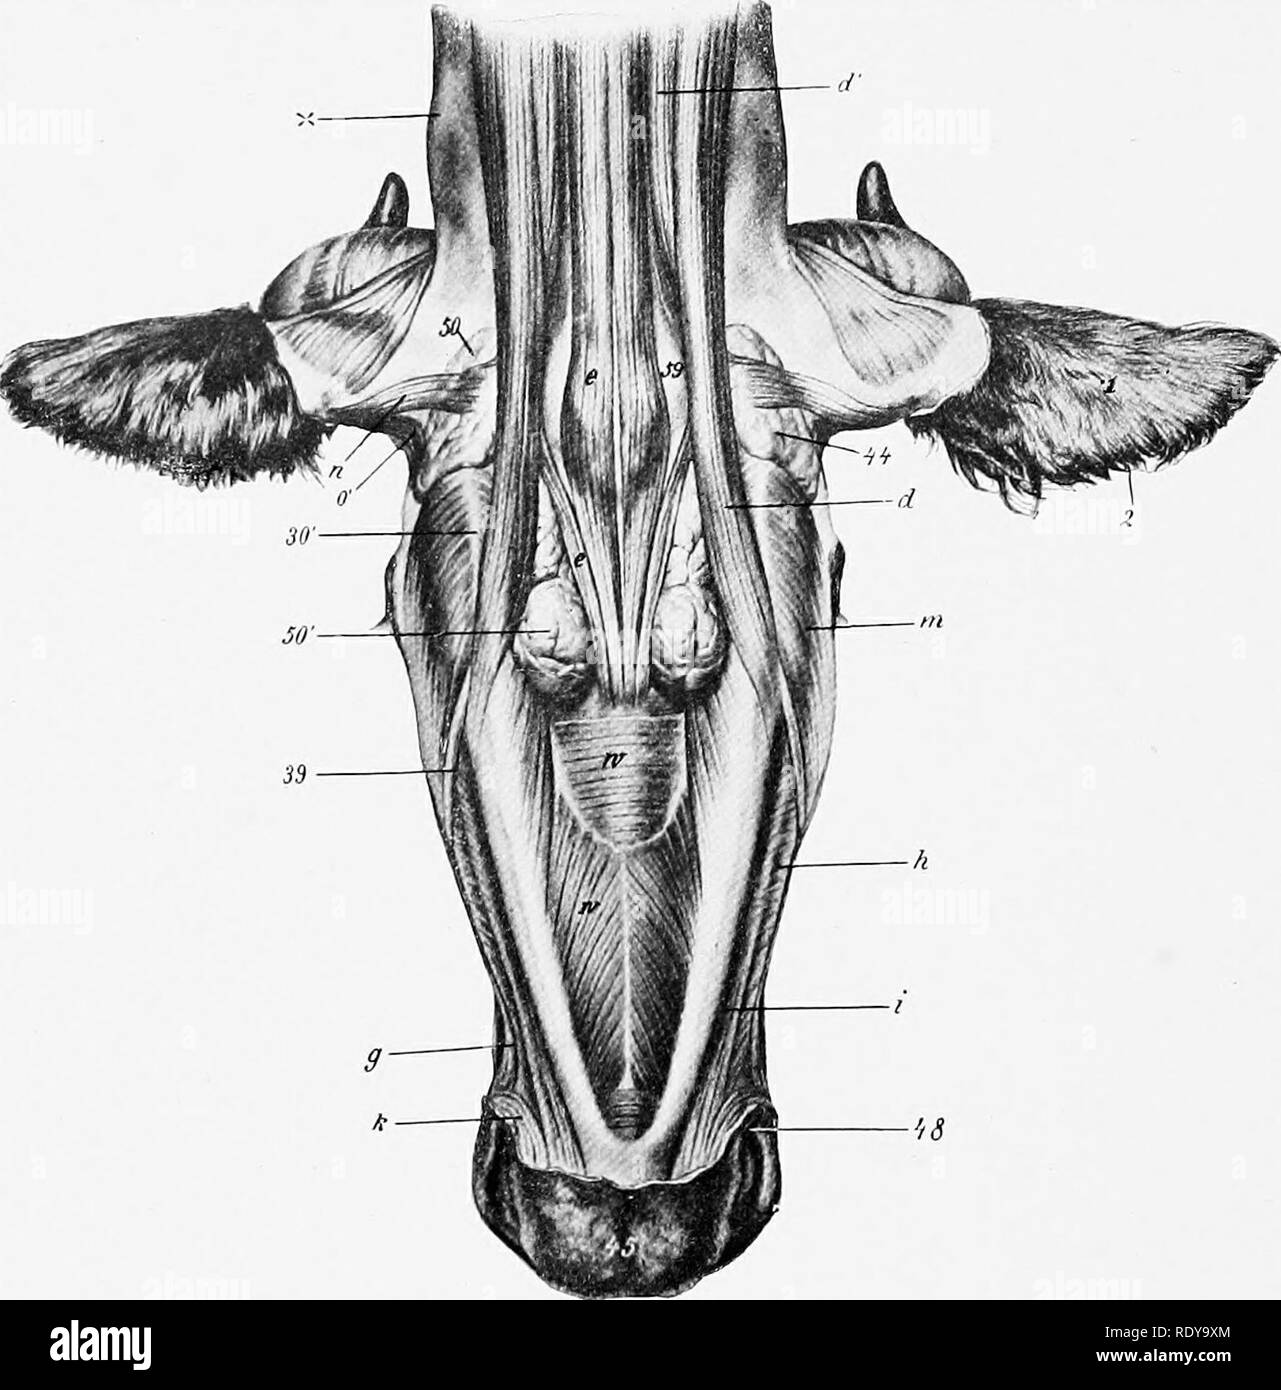 . The anatomy of the domestic animals . Veterinary anatomy. 346 THE MUSCLES OF THE OX MANDIBIILAR MUSCLES The masseter is not so large as in the horse; a considerable part of it arises on the facial tuberosity and is directed obliquely backward and downward, so that it would draw the lower jaw forward as well as upward. The temporalis conforms to the temporal fossa, and is therefore longer and entirely lateral in position. The pterygoideus medialis arises from the lateral surface of the perpendicular part of the palatine bone and from the pterygoid process. Since the origin is nearer. Fig. 302 Stock Photo